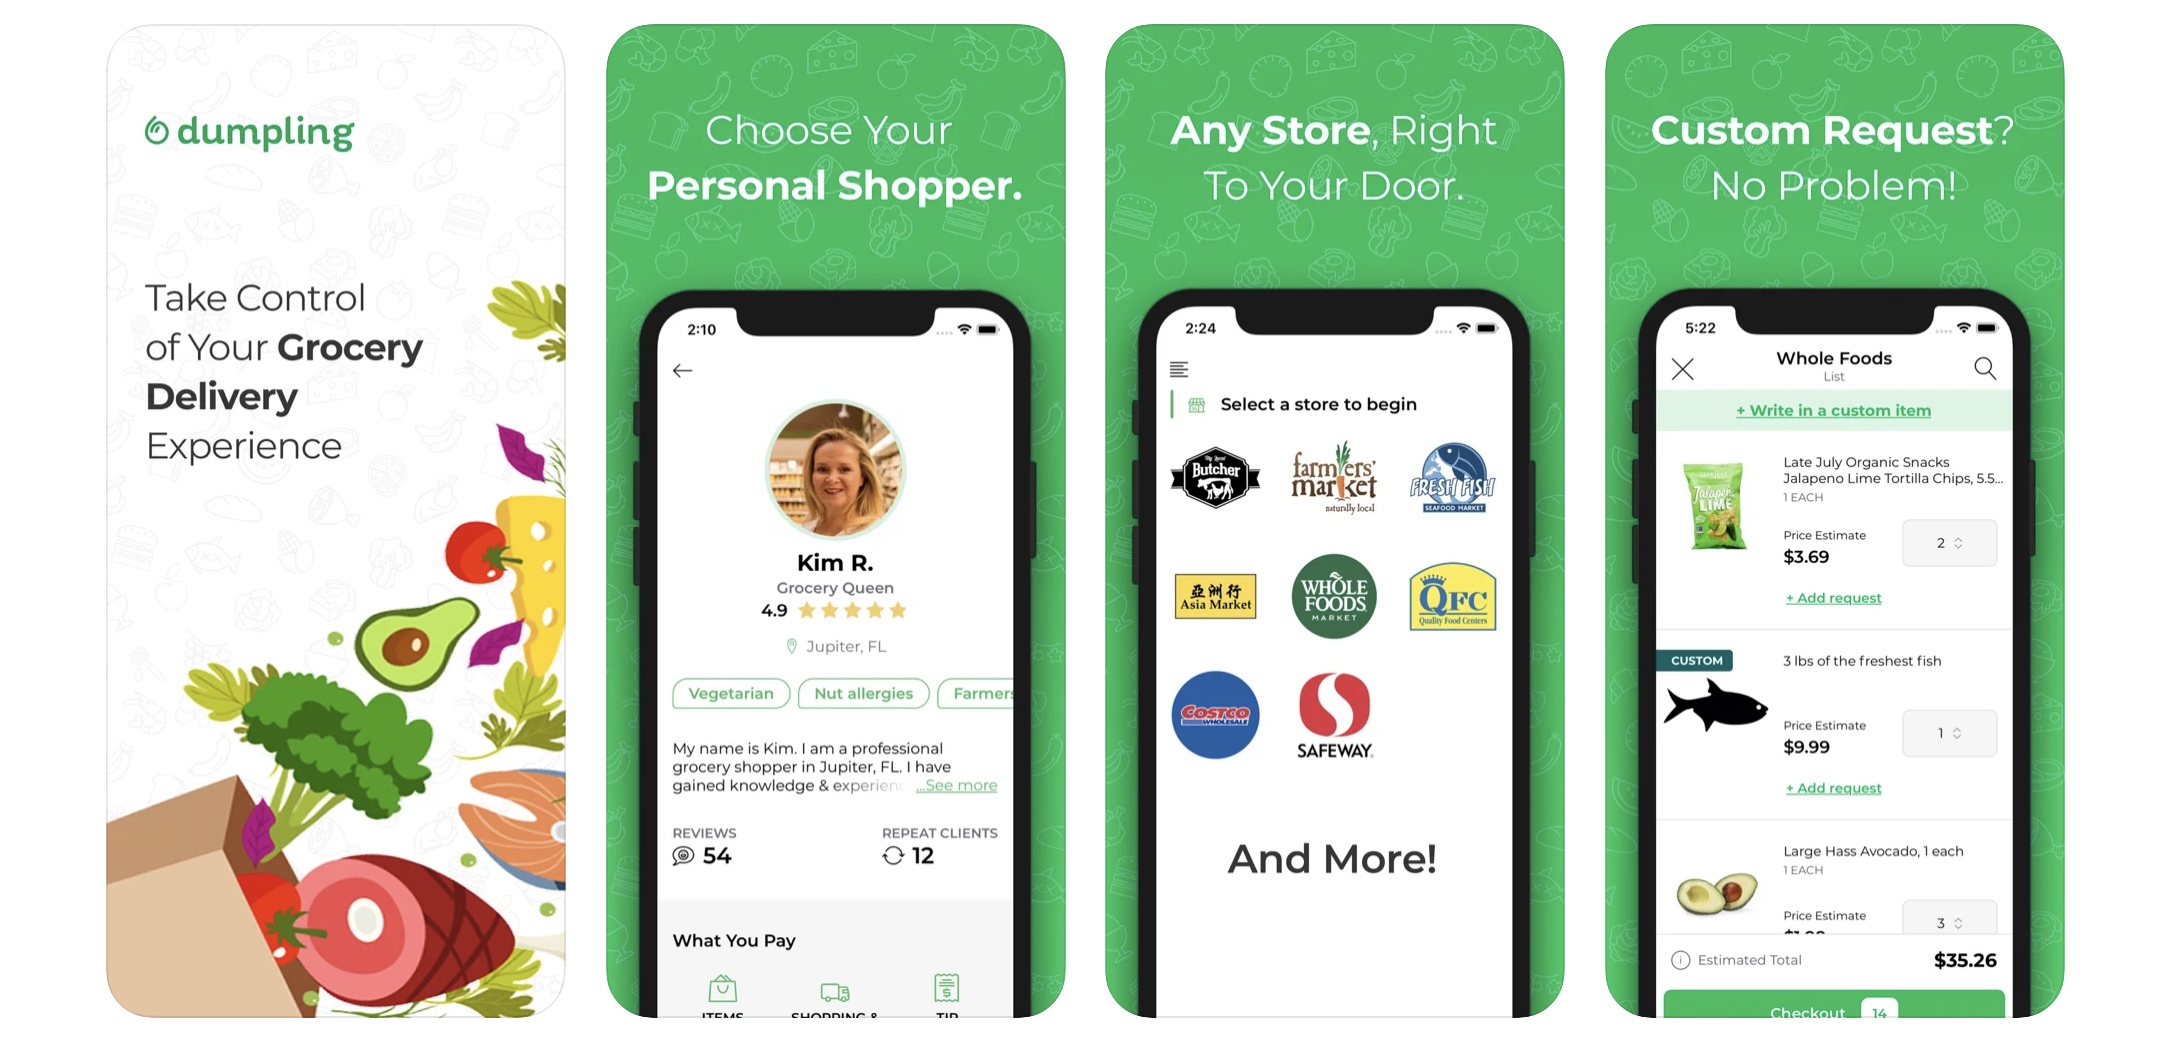 PICK•A•ROO  Grocery, Food & Shops Delivery App